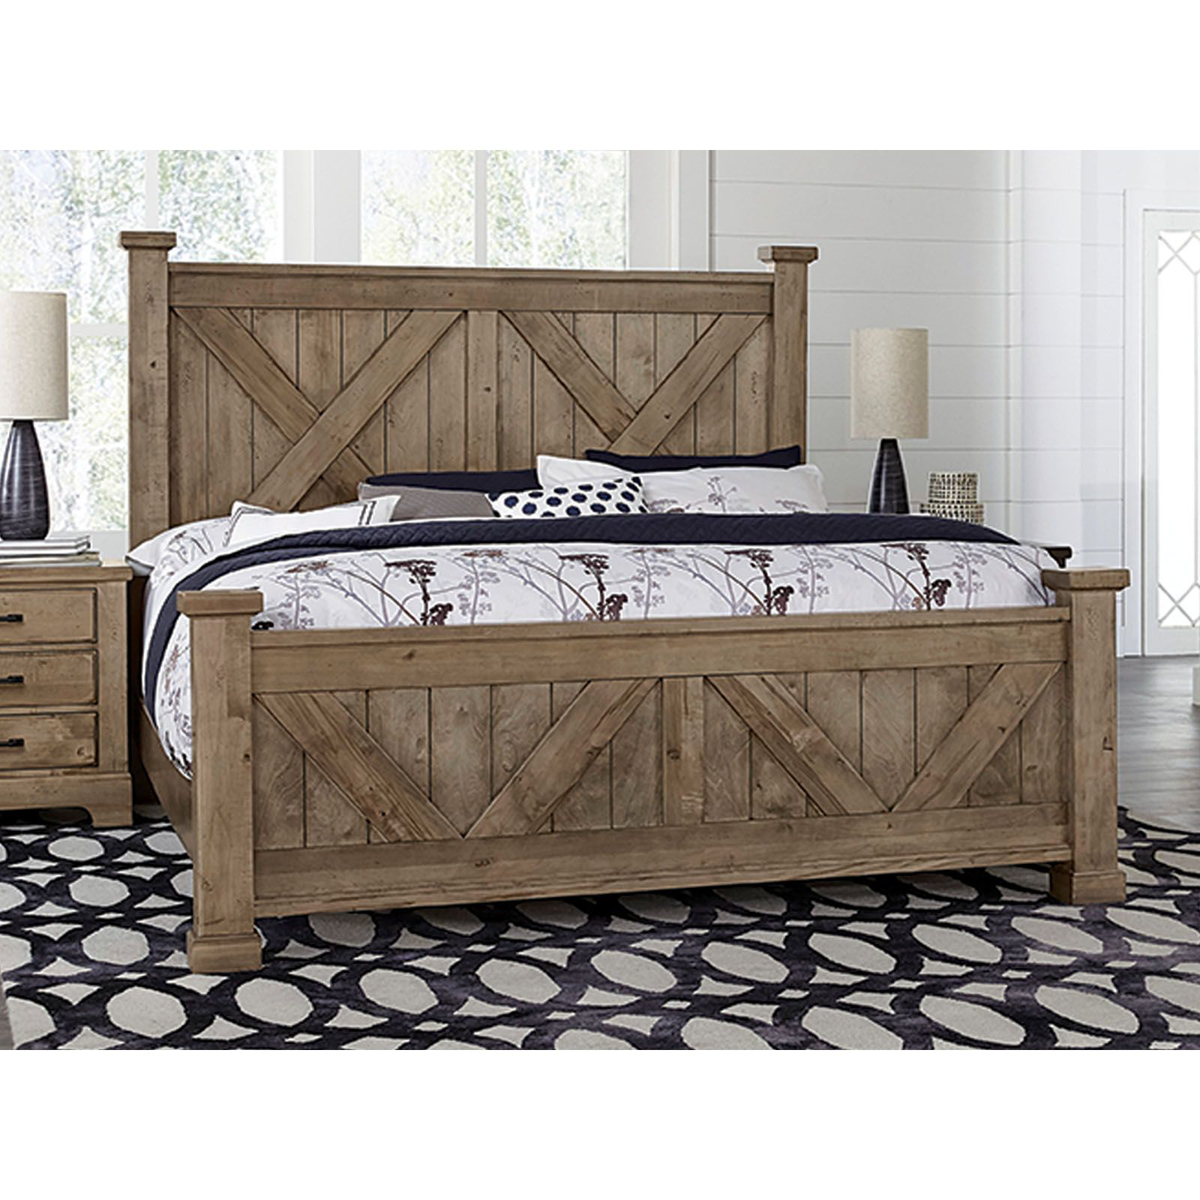 Picture of Cool Rustic Queen Bed with Rails